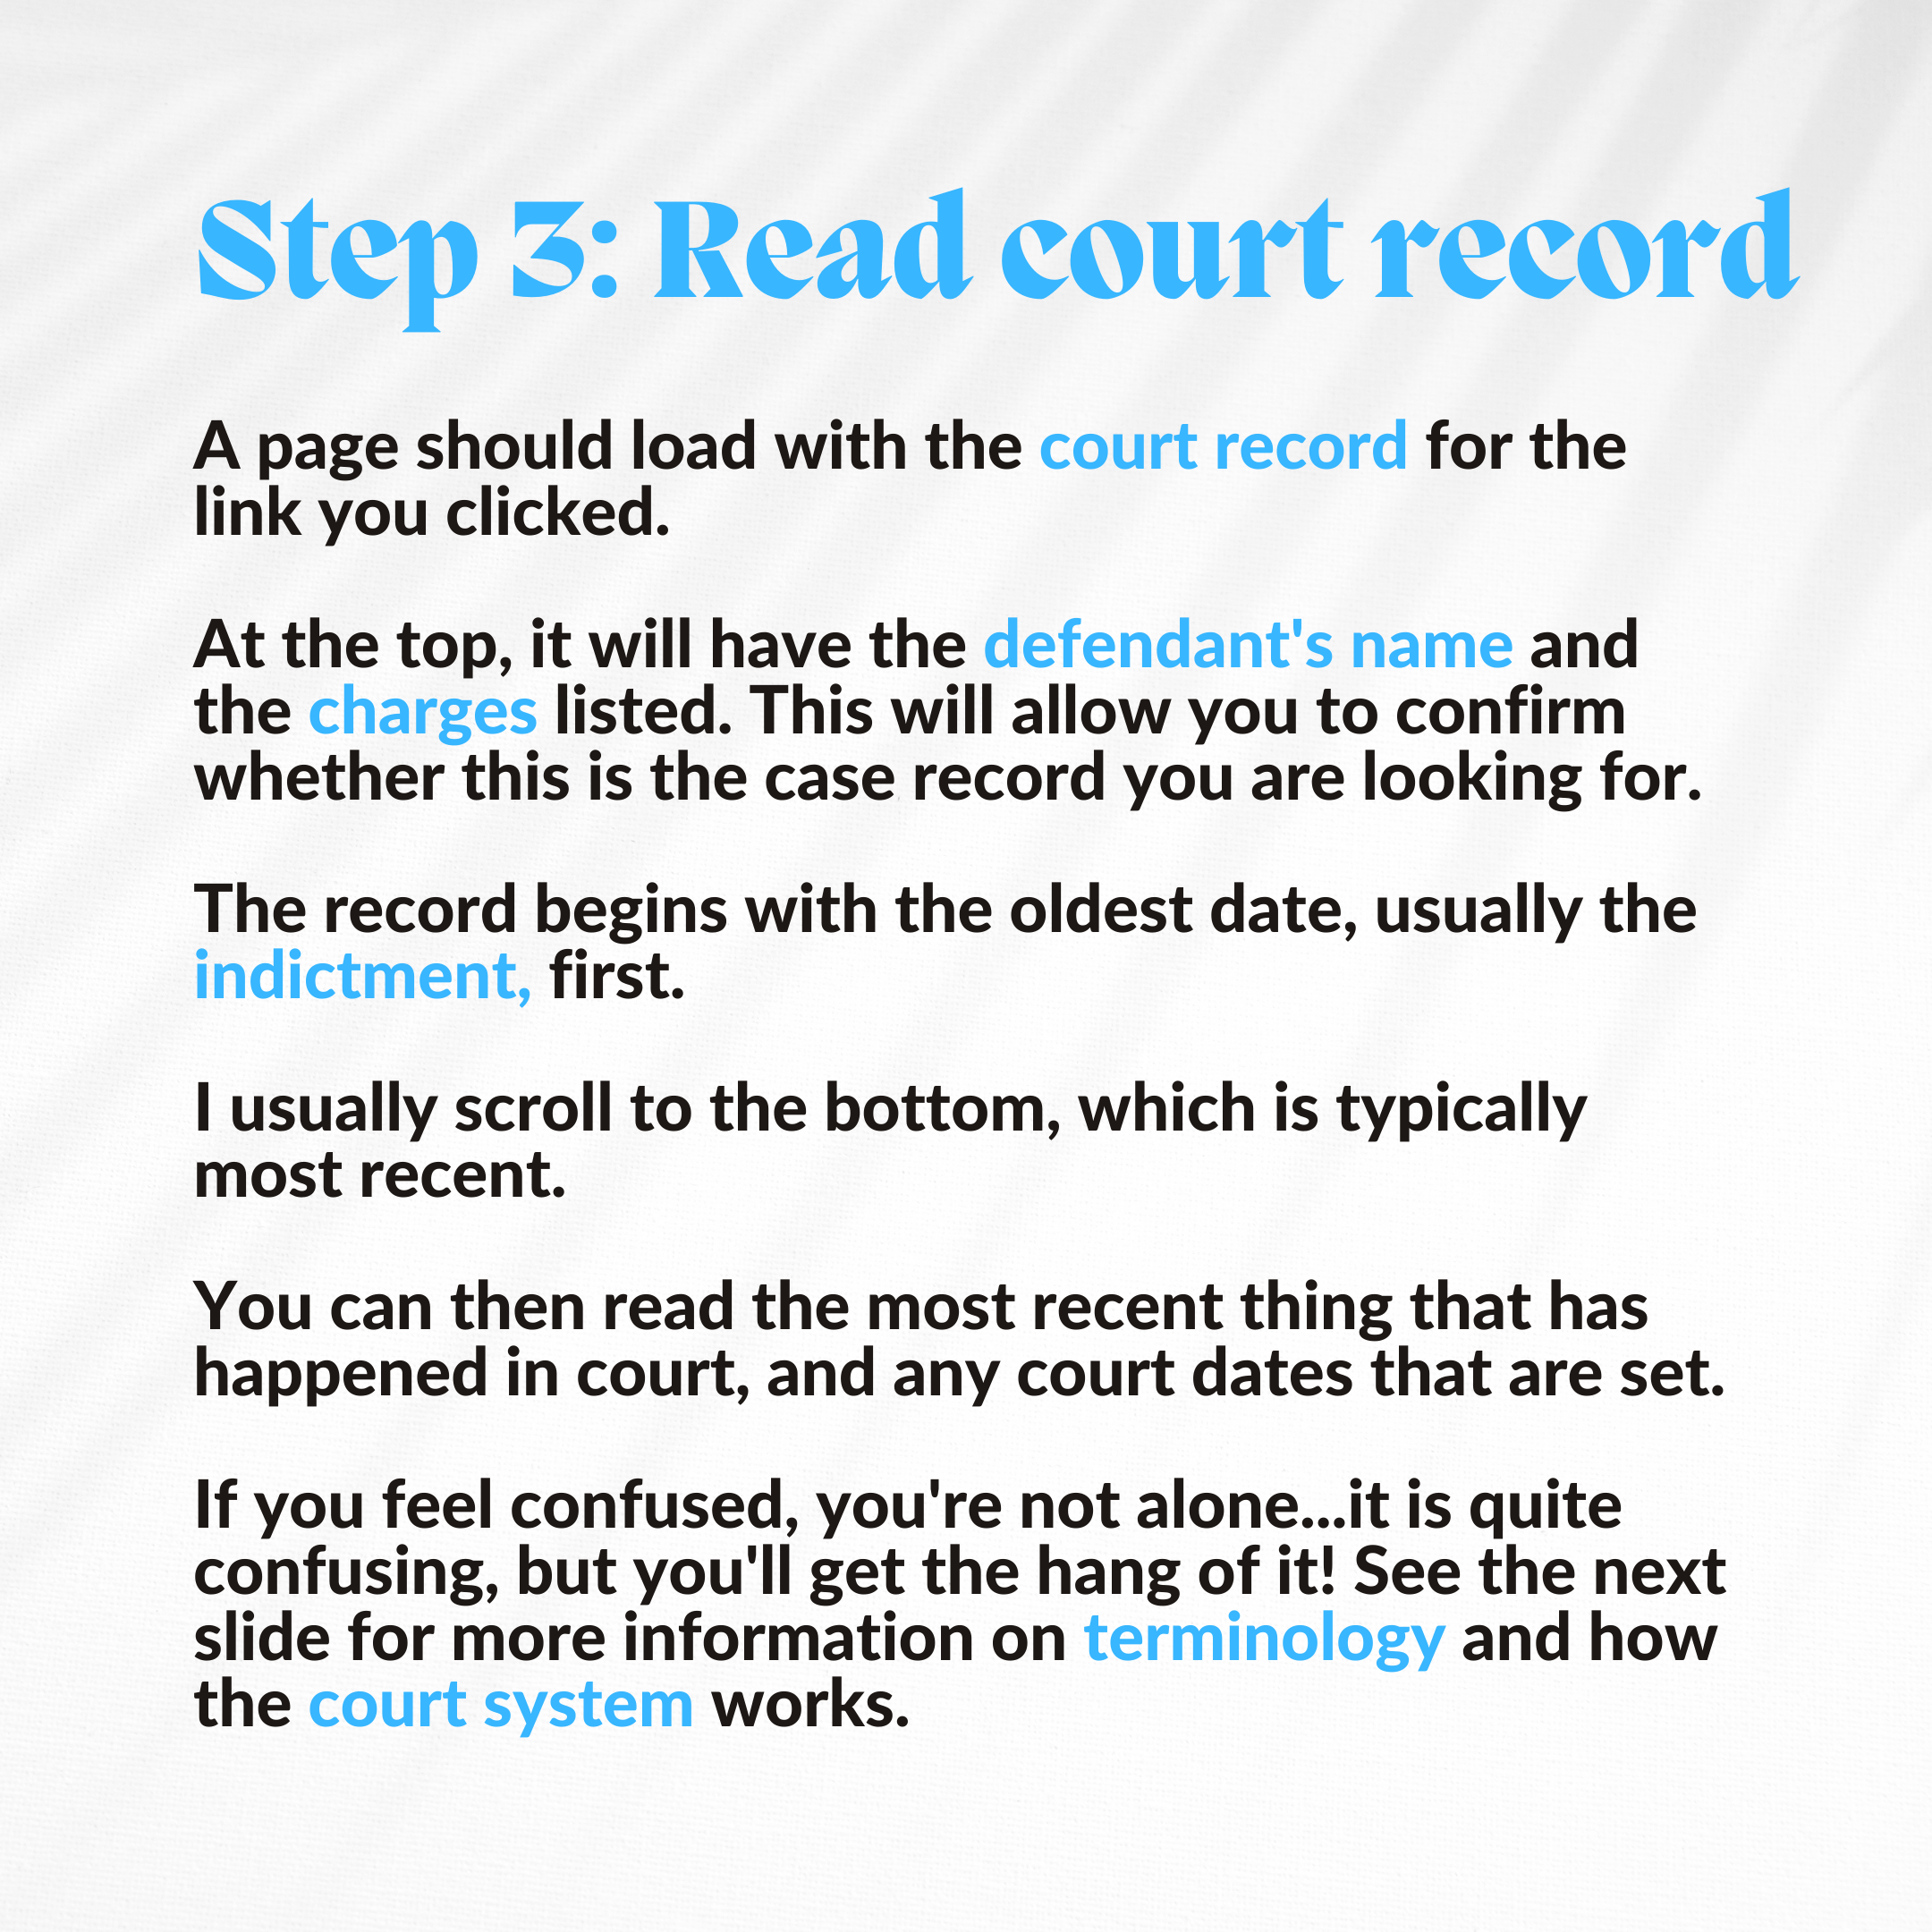 Step 3: Read Court Record